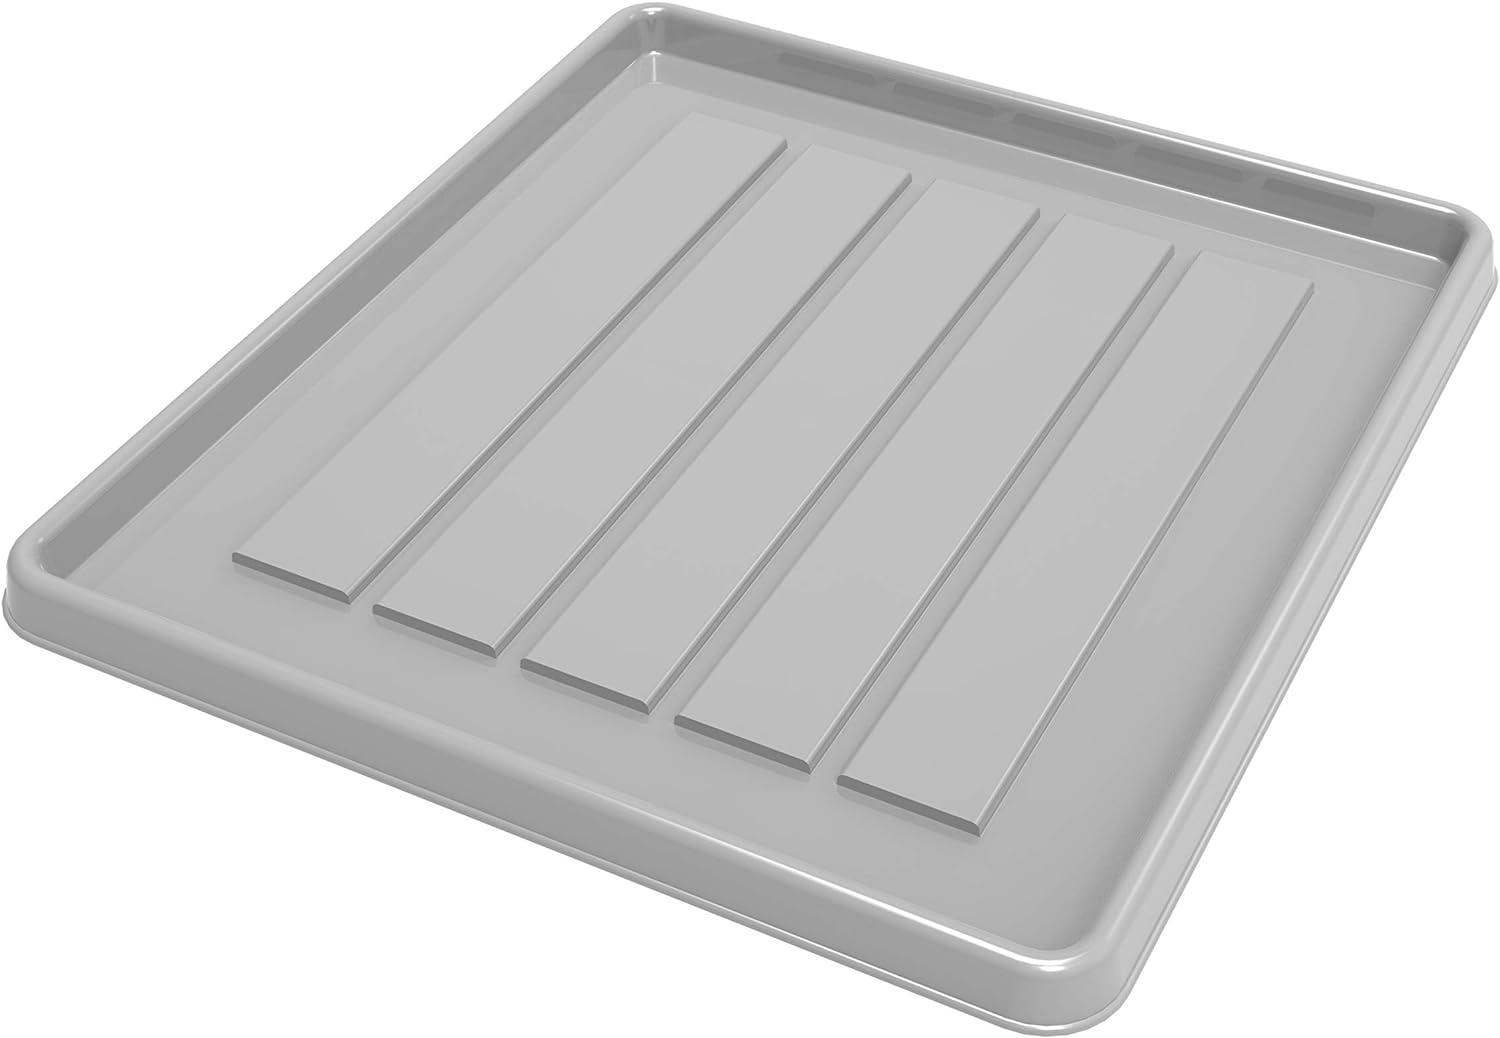 storex school locker and office cubicle boot tray 12 38 x 0 81 x 11 inches gray 00803a18c  storex b07dt9hpkt